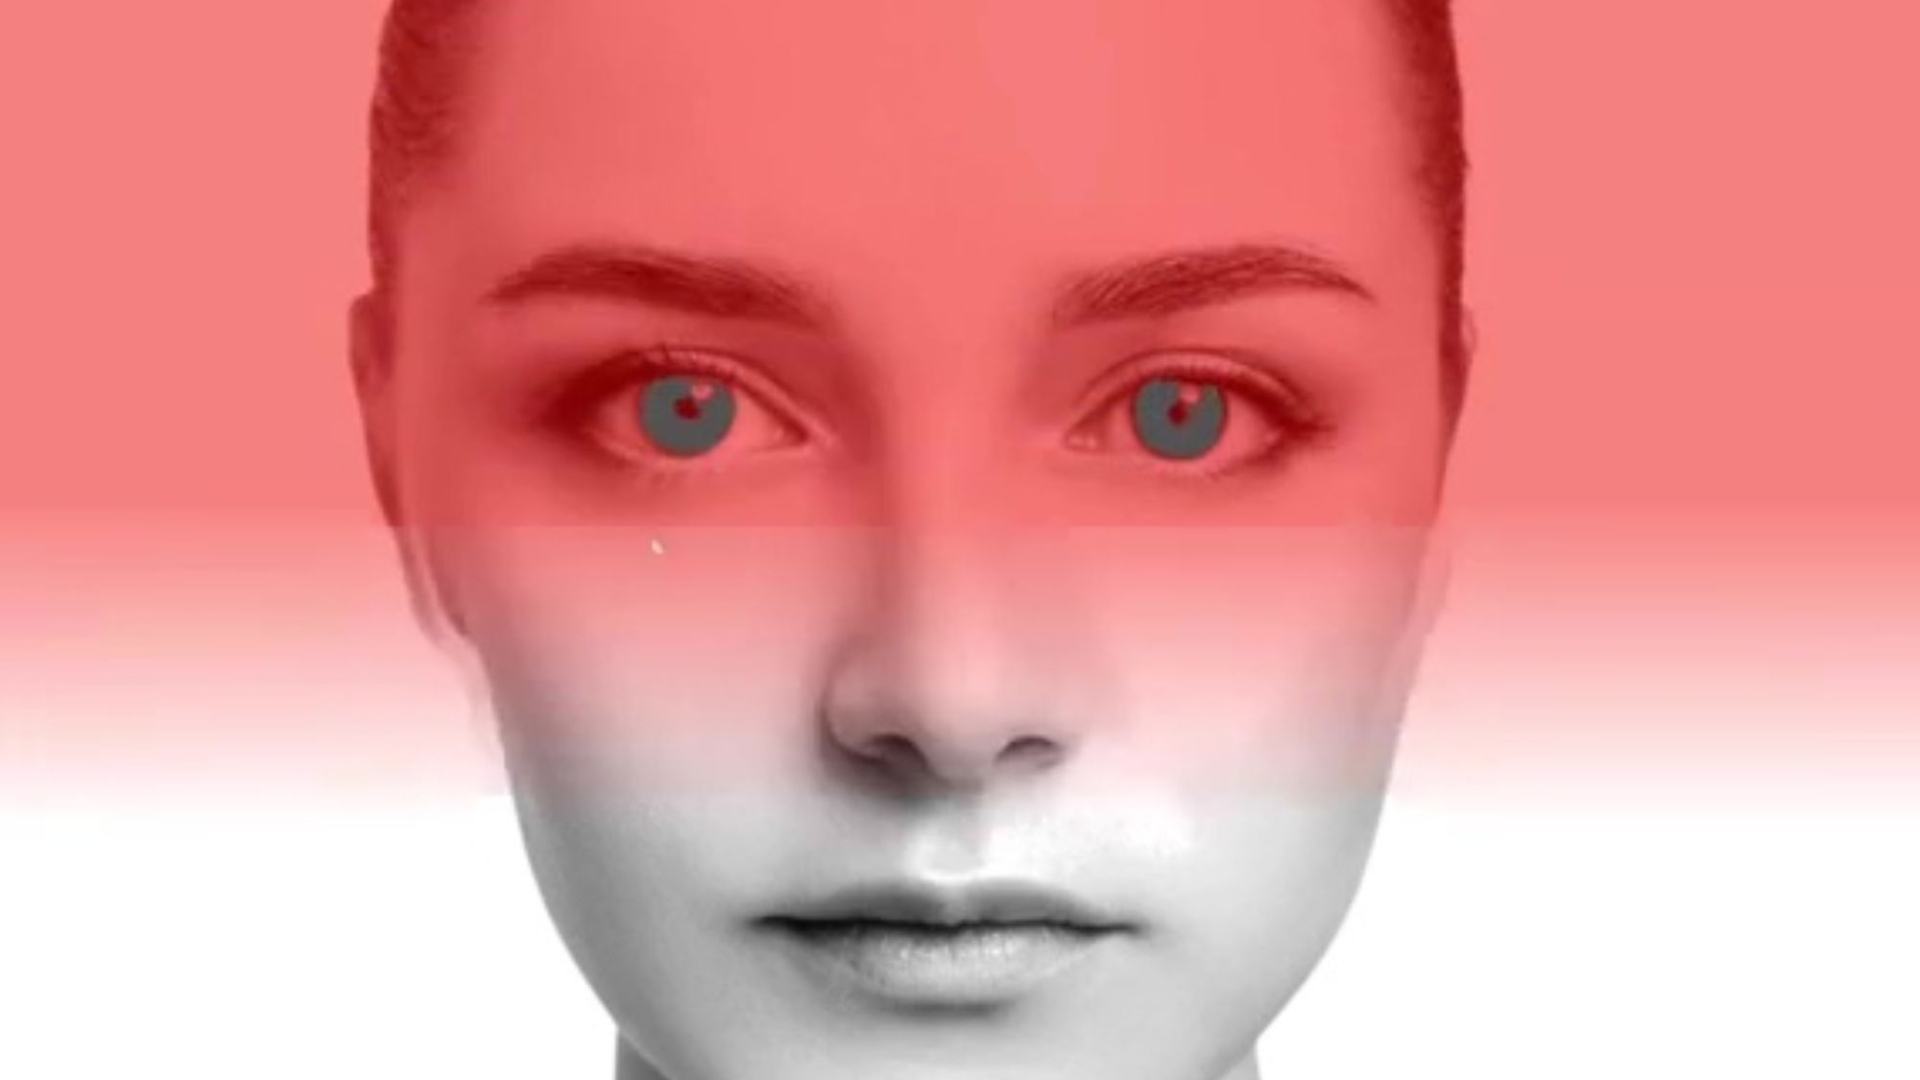 An incredible illusion will convince you that you know the color of this woman's eyes - but the truth is shocking